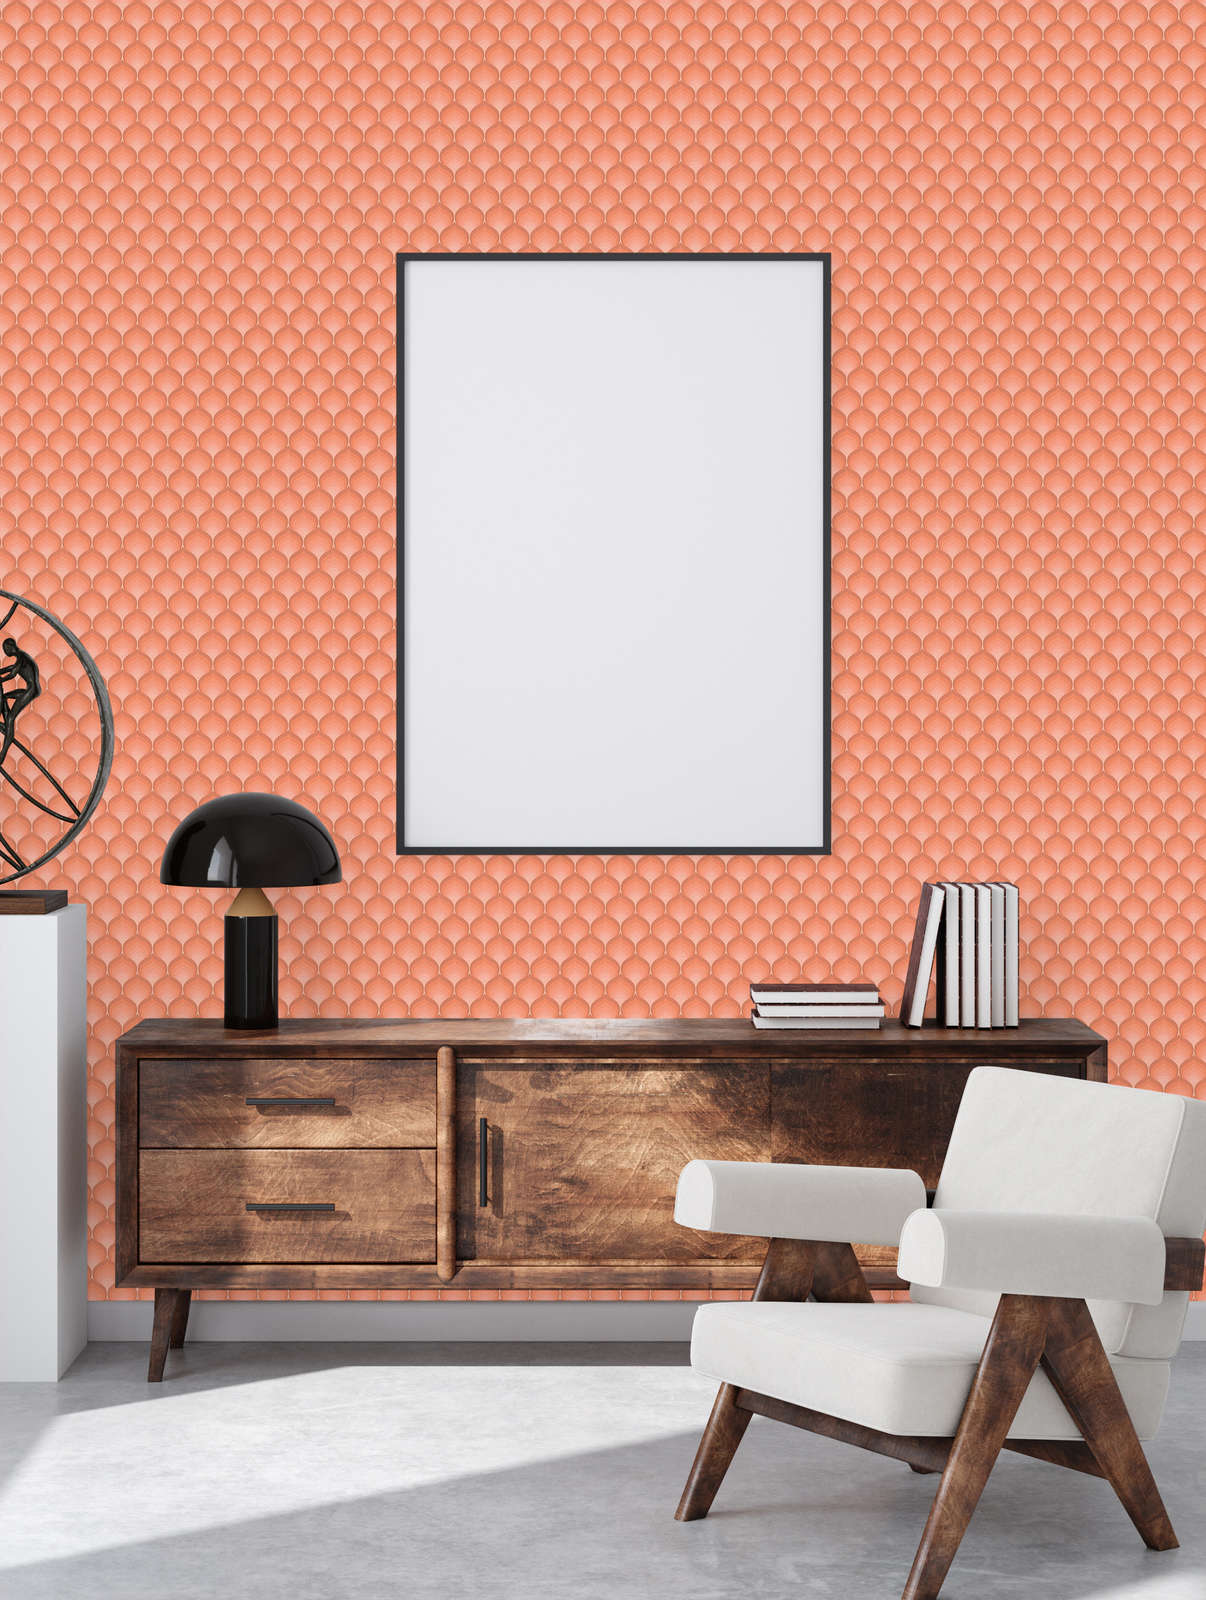             Retro non-woven wallpaper with scale pattern in warm colours - orange, red, pink
        